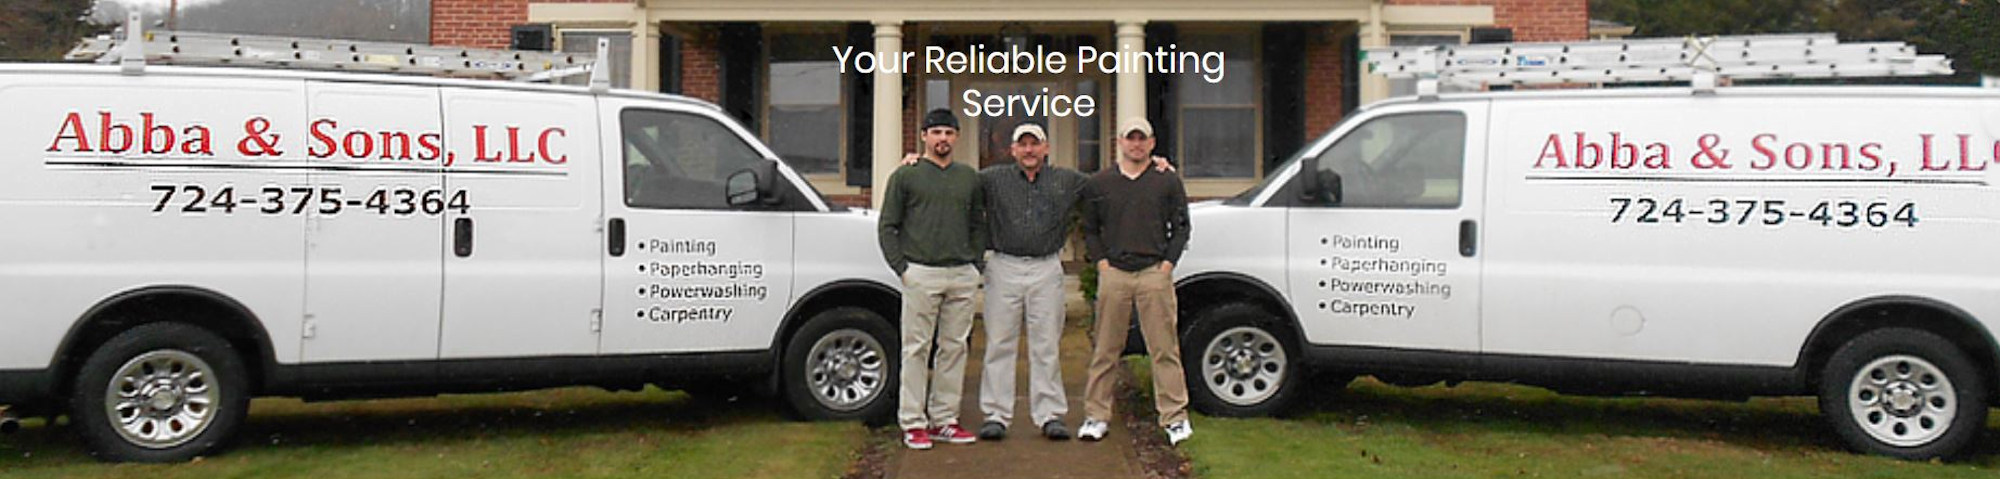 Abba & Sons, LLC Your Reliable Painting Service 